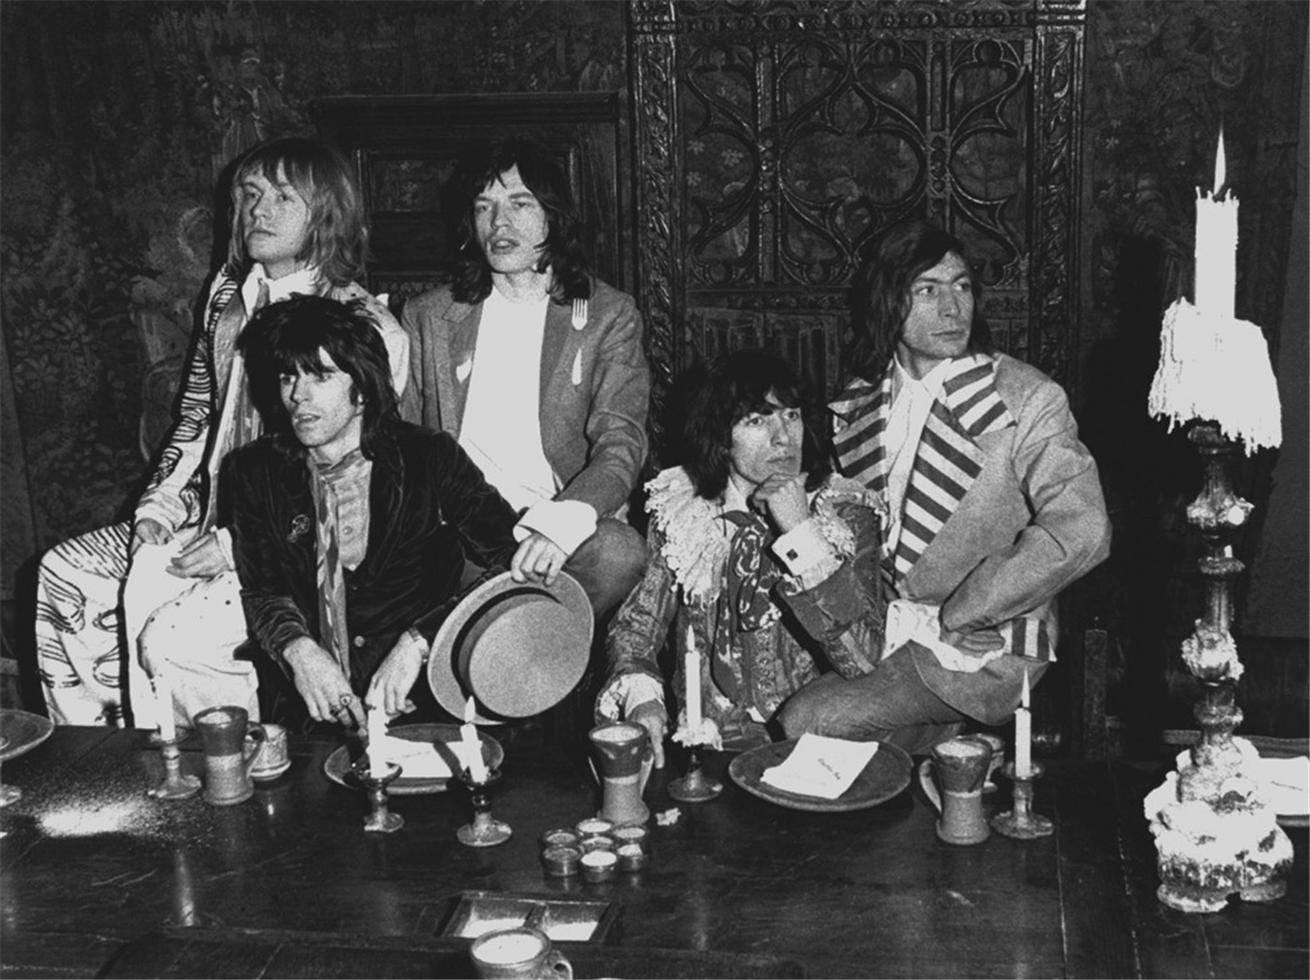 Barrie Wentzell Black and White Photograph - The Rolling Stones, Beggars Banquet, Kensington, London, 1968